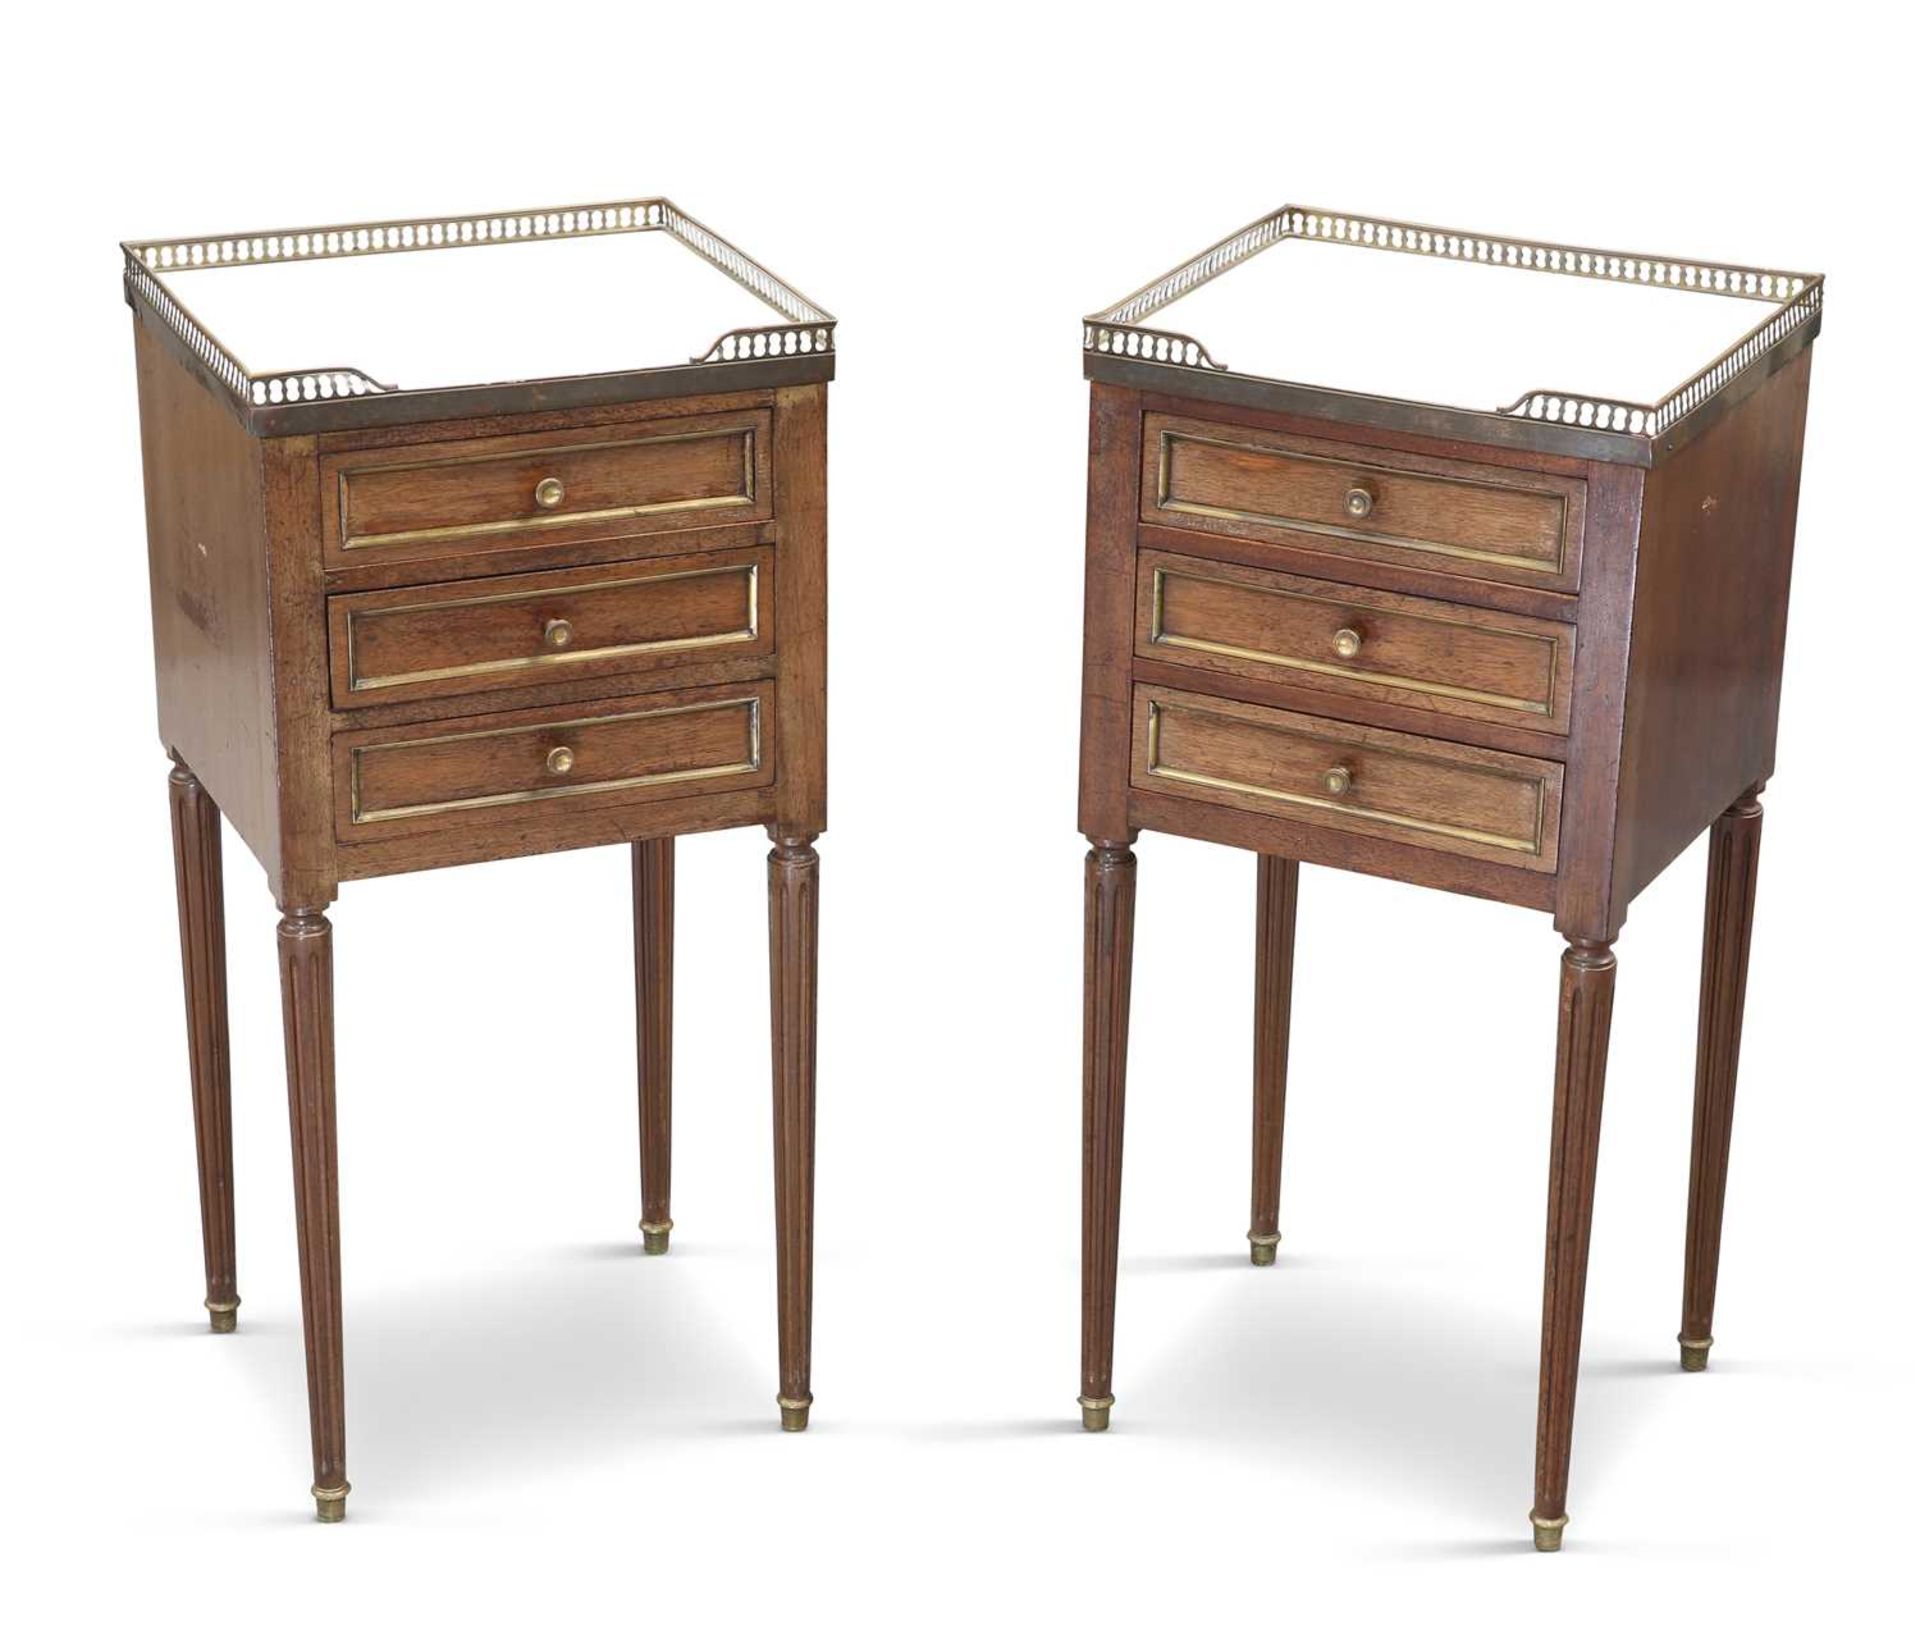 A PAIR OF LOUIS XVI STYLE BRASS-MOUNTED AND MARBLE-TOPPED BEDSIDE TABLES, 20TH CENTURY